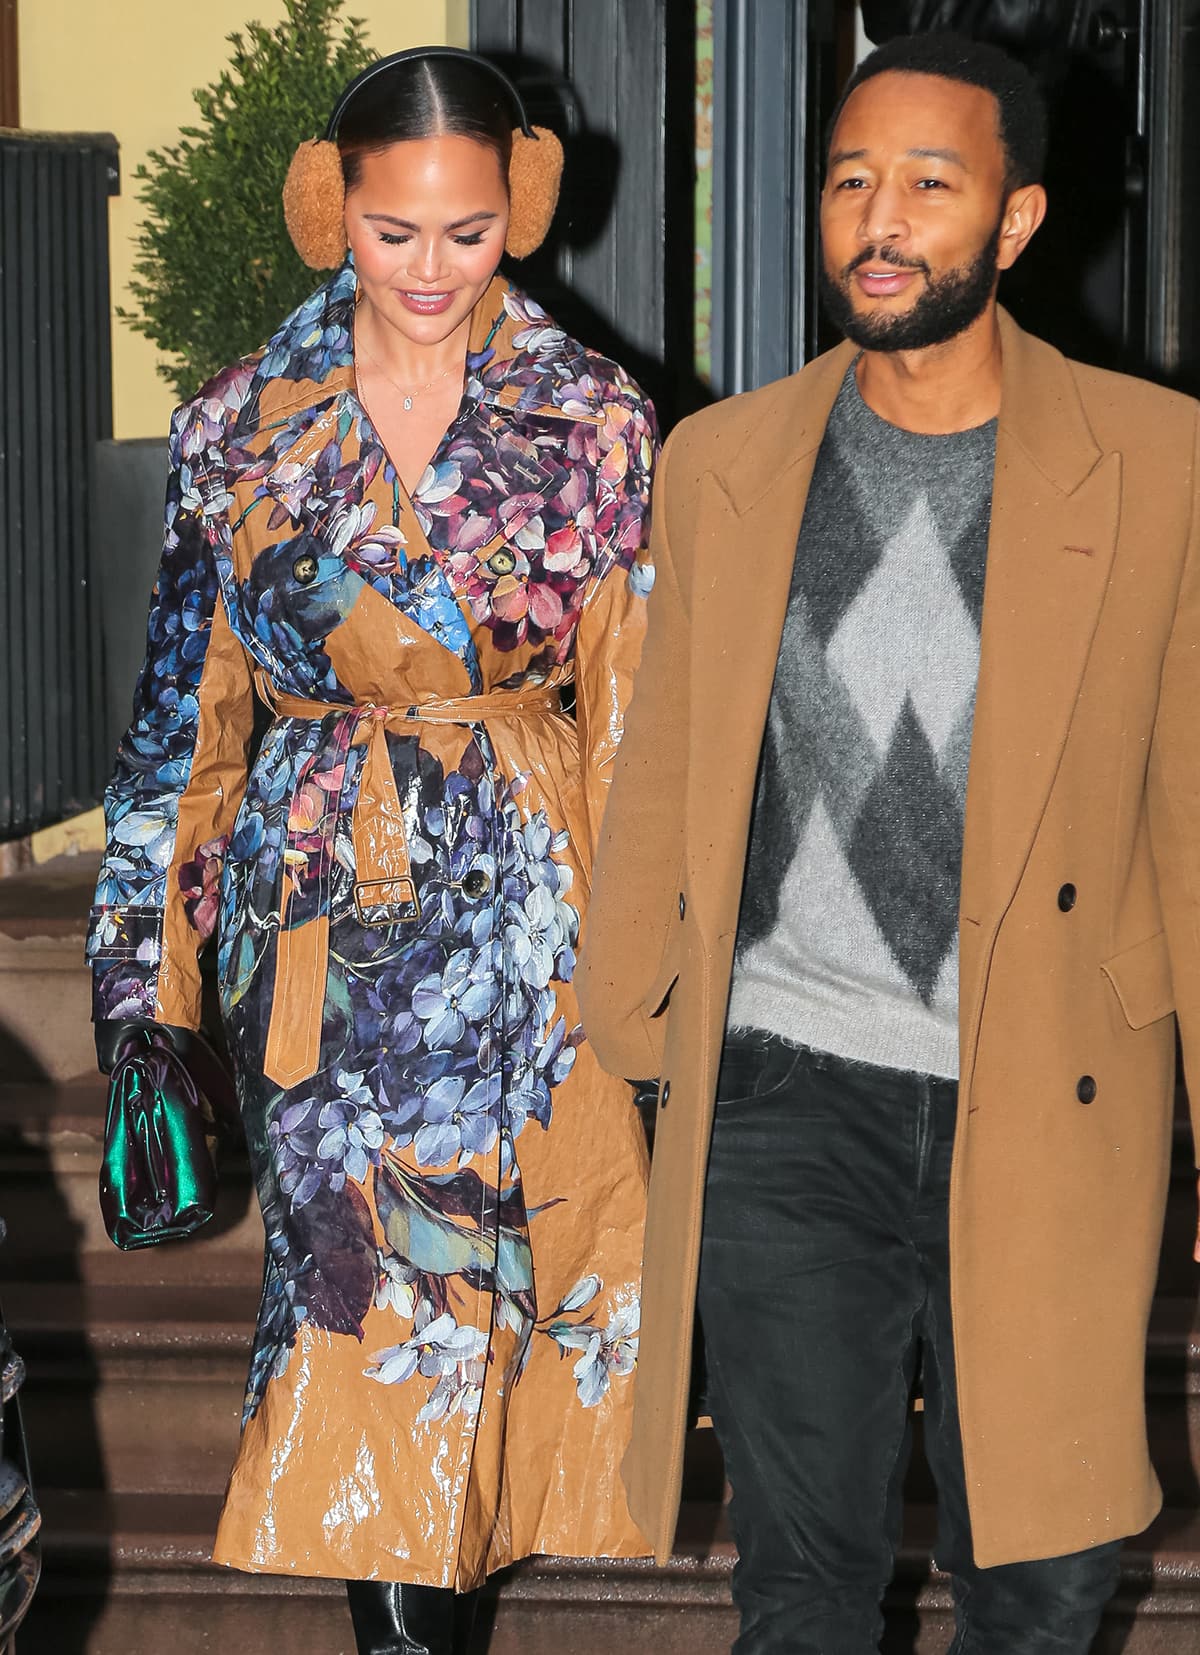 Chrissy Teigen is hard to ignore in her tan Dries Van Noten hydrangea-printed water-repellent trench coat and matching earmuffs while out and about New York City